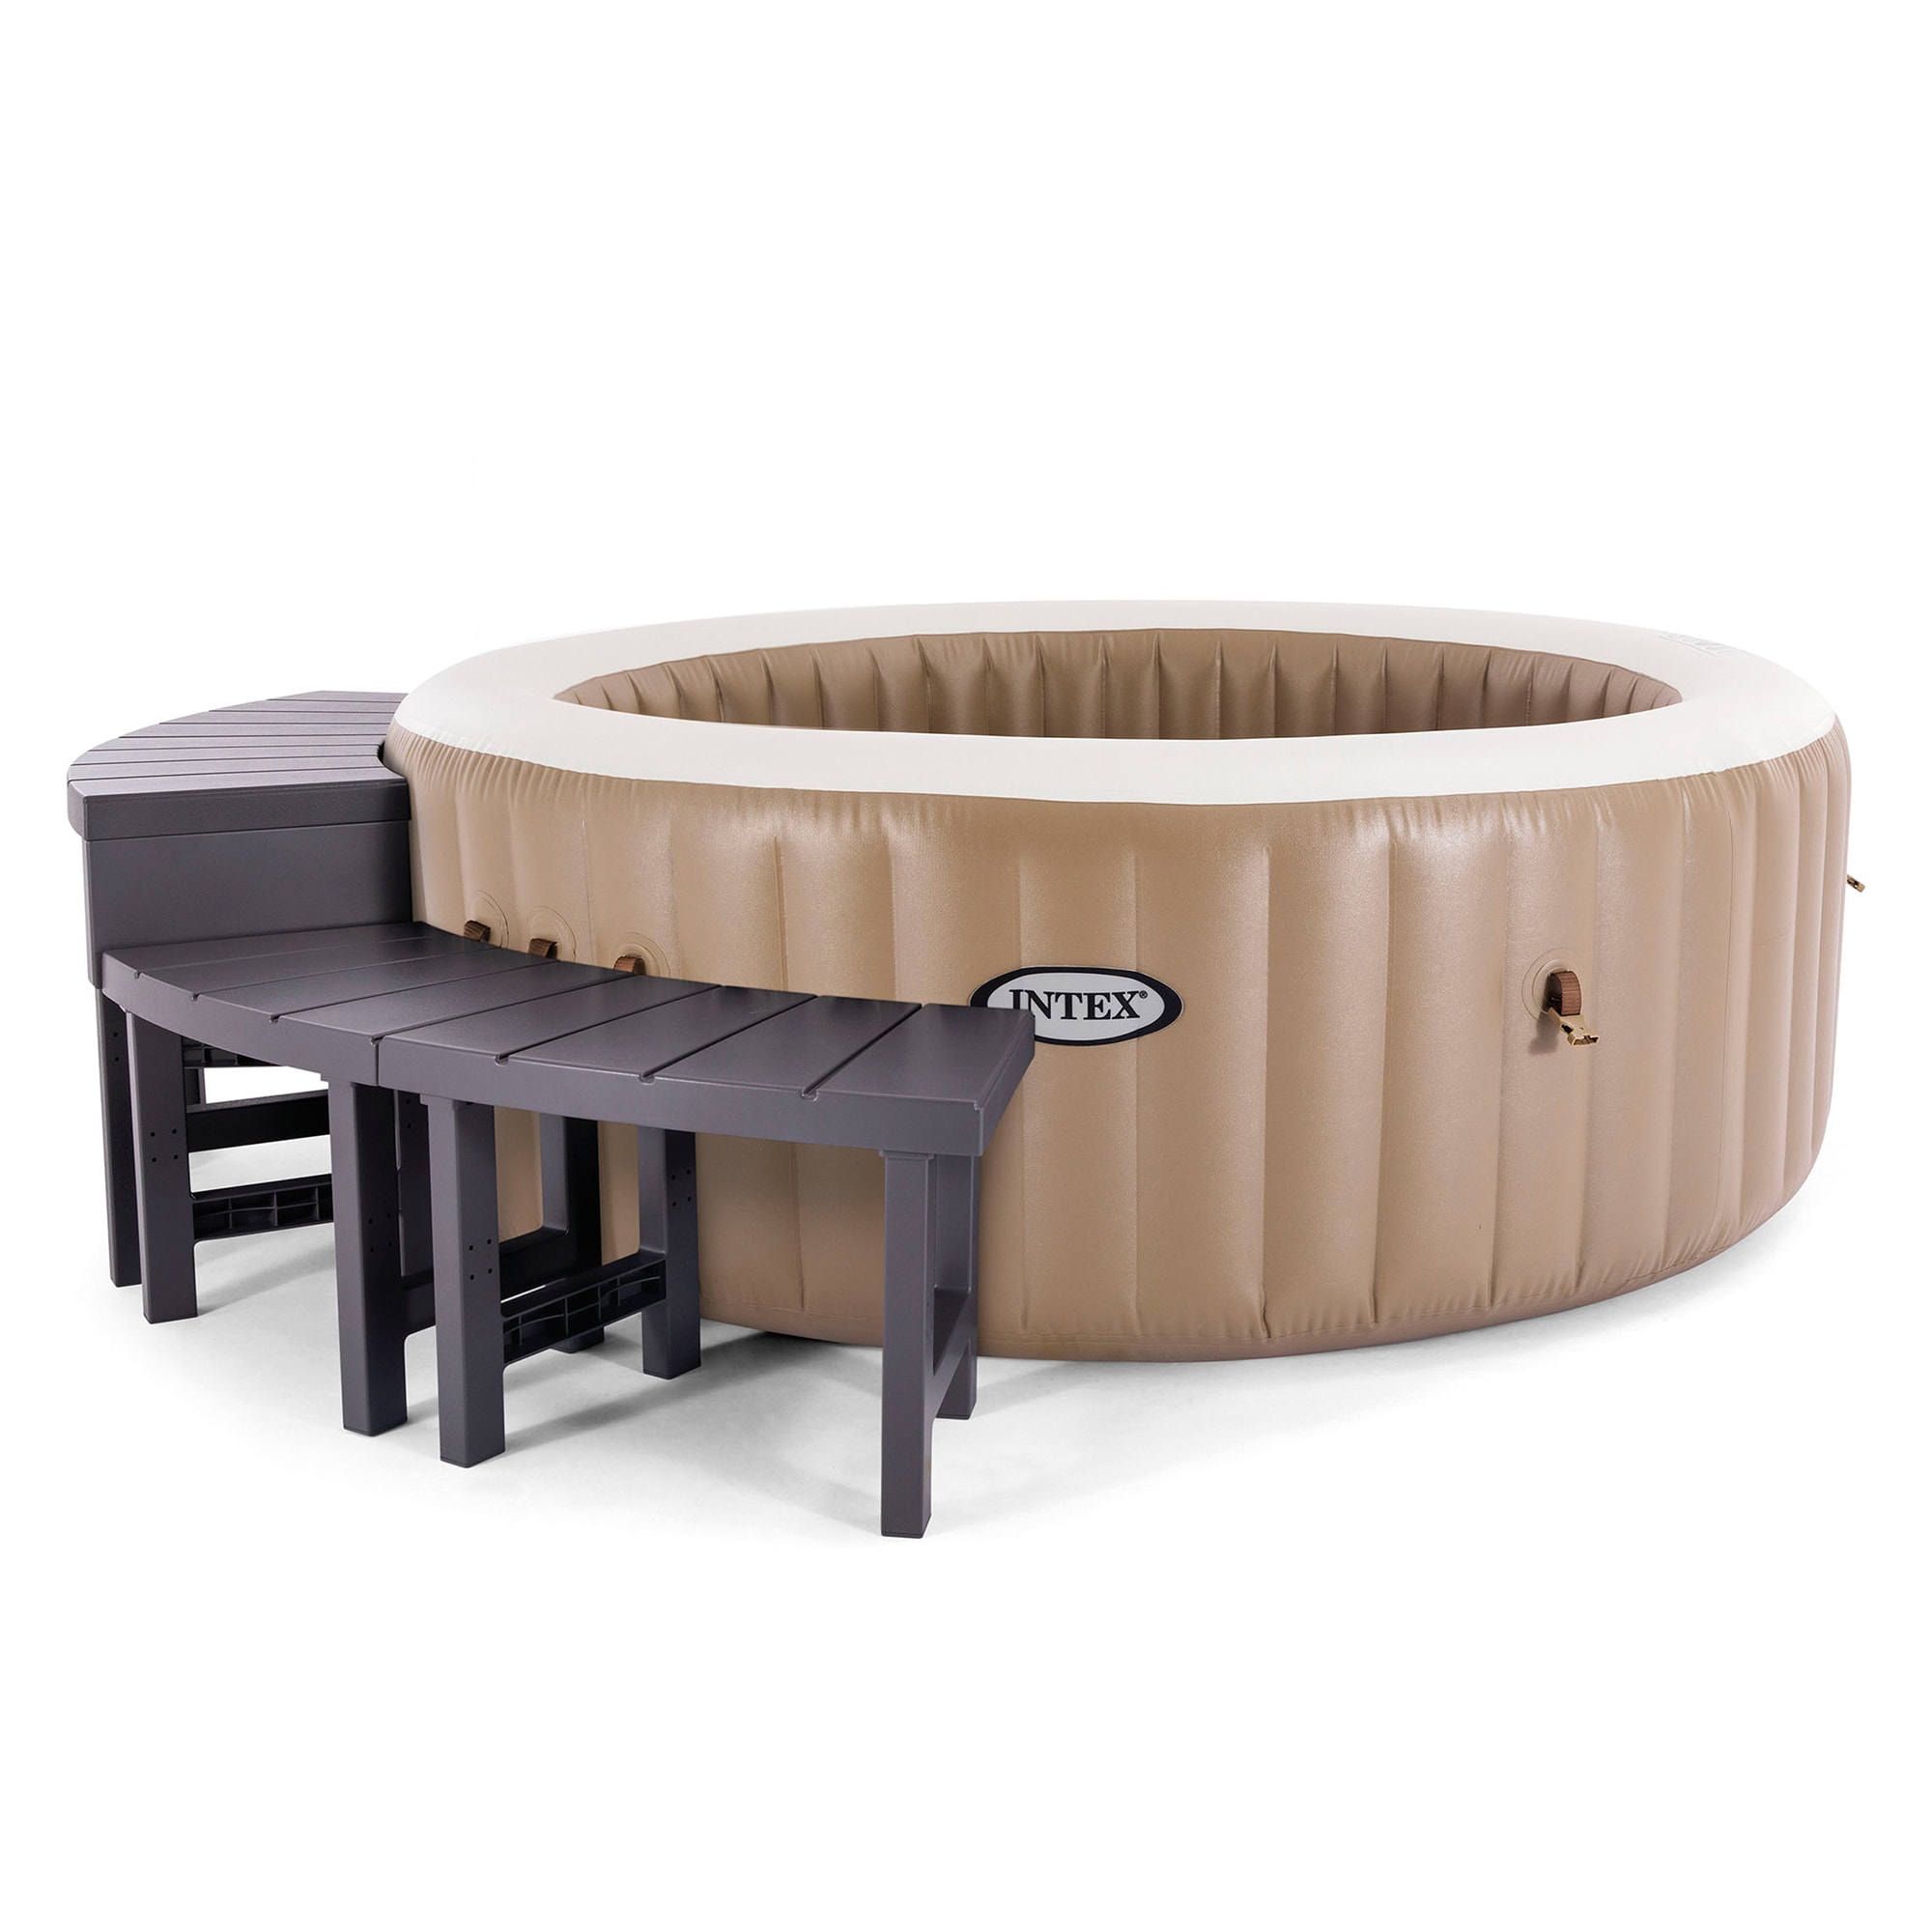 Tubs, Spas & Components at Lowes.com